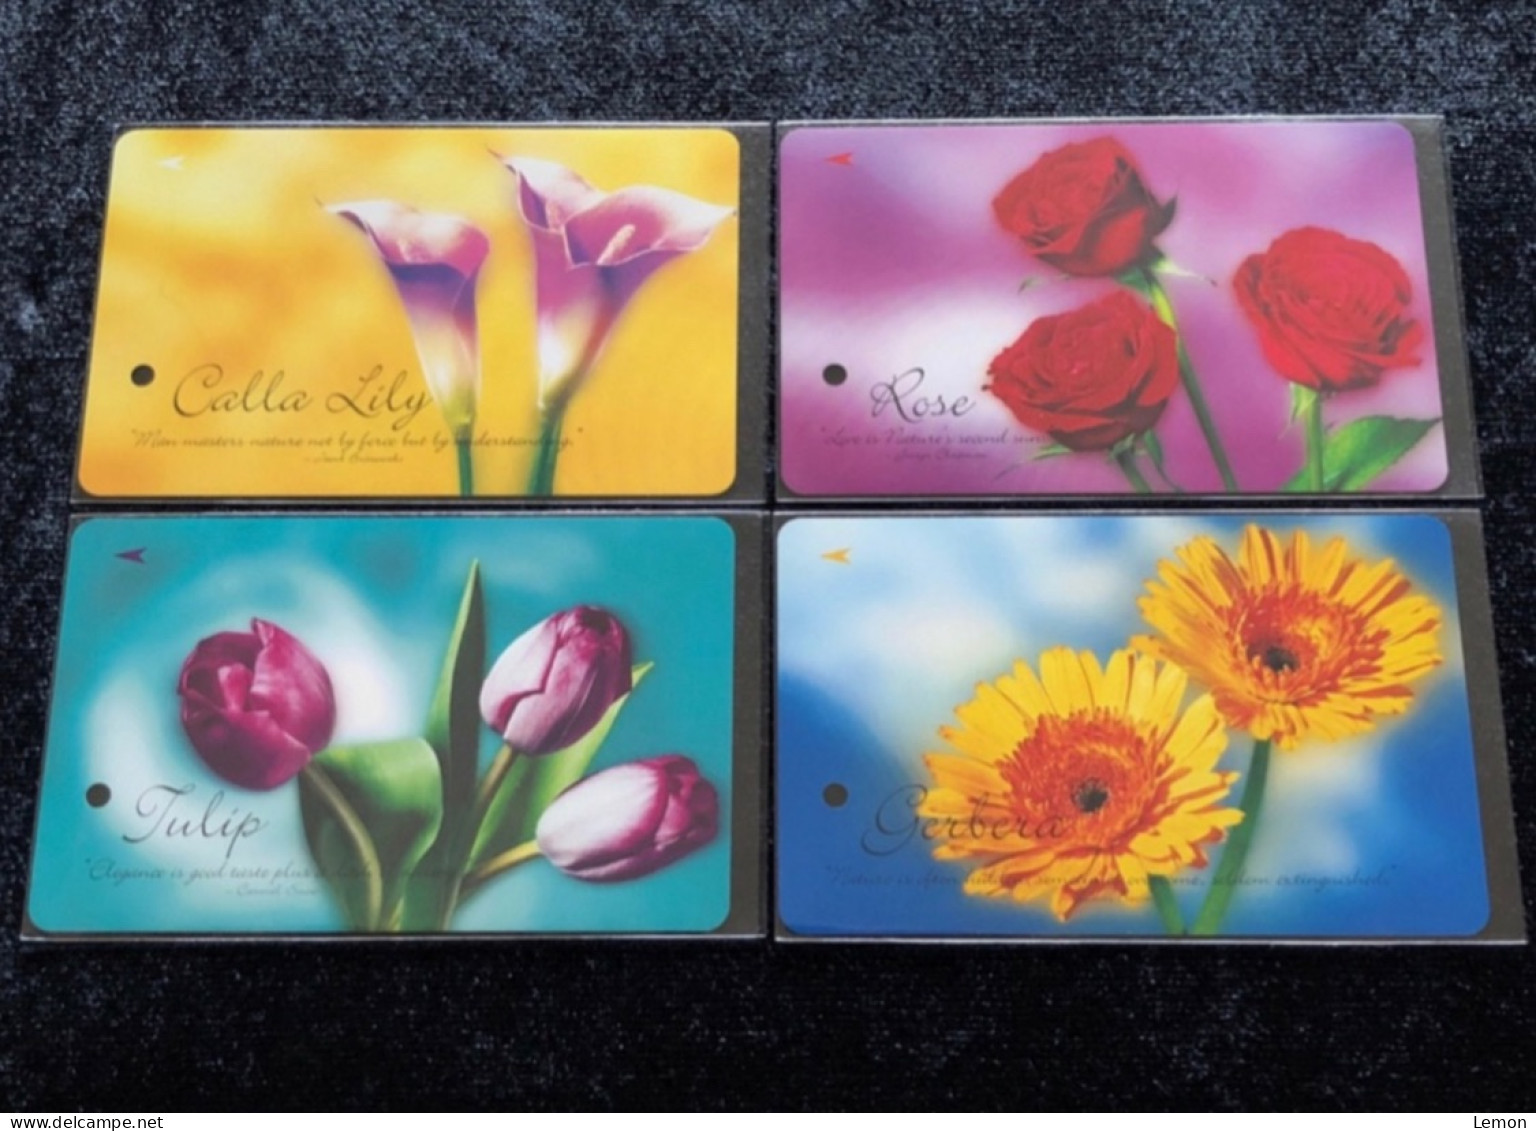 Singapore SMRT TransitLink Metro Train Subway Ticket Card, The Scent Of Nature Flower, Set Of 4 Used Cards - Singapore